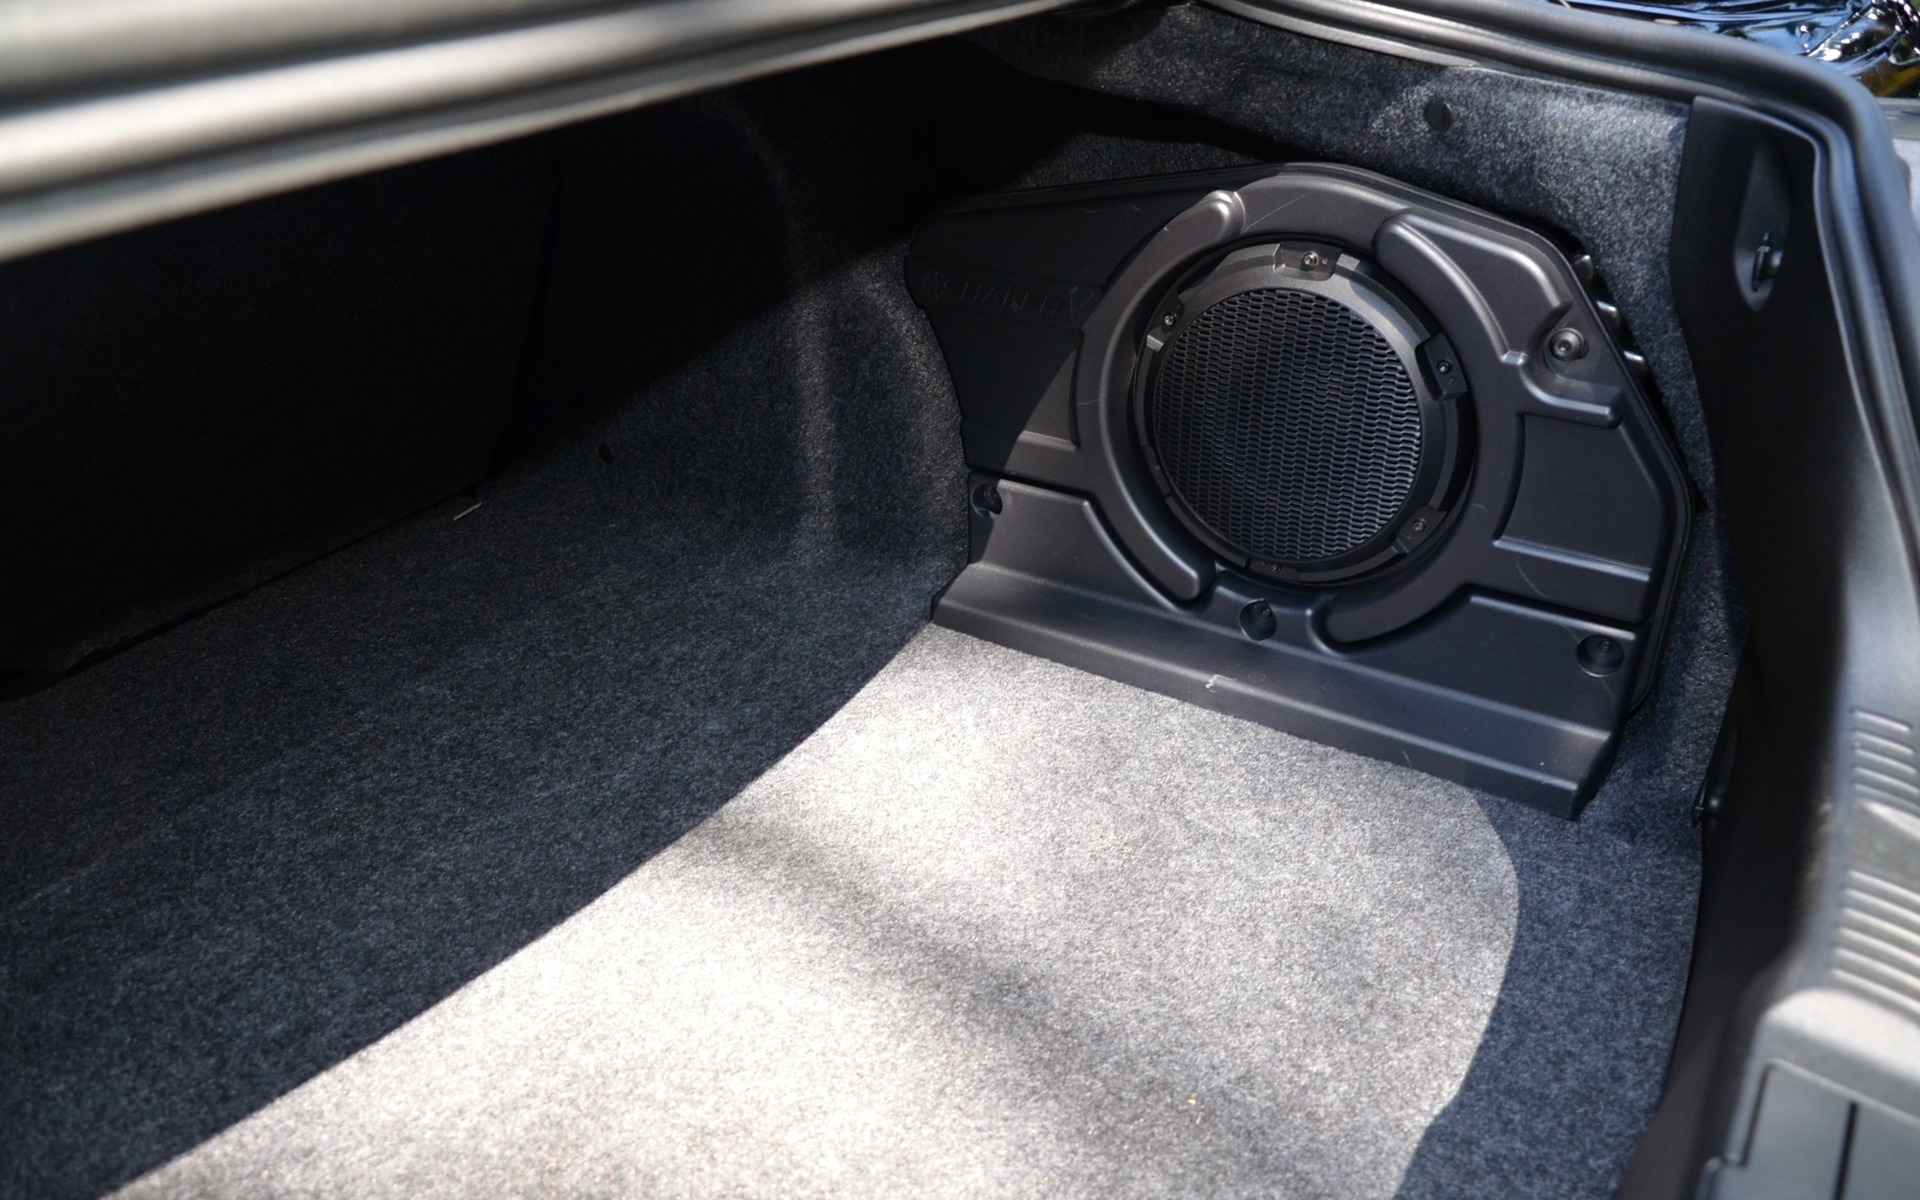 2015 Ford Mustang Coupe - Shaker Pro audio system subwoofer